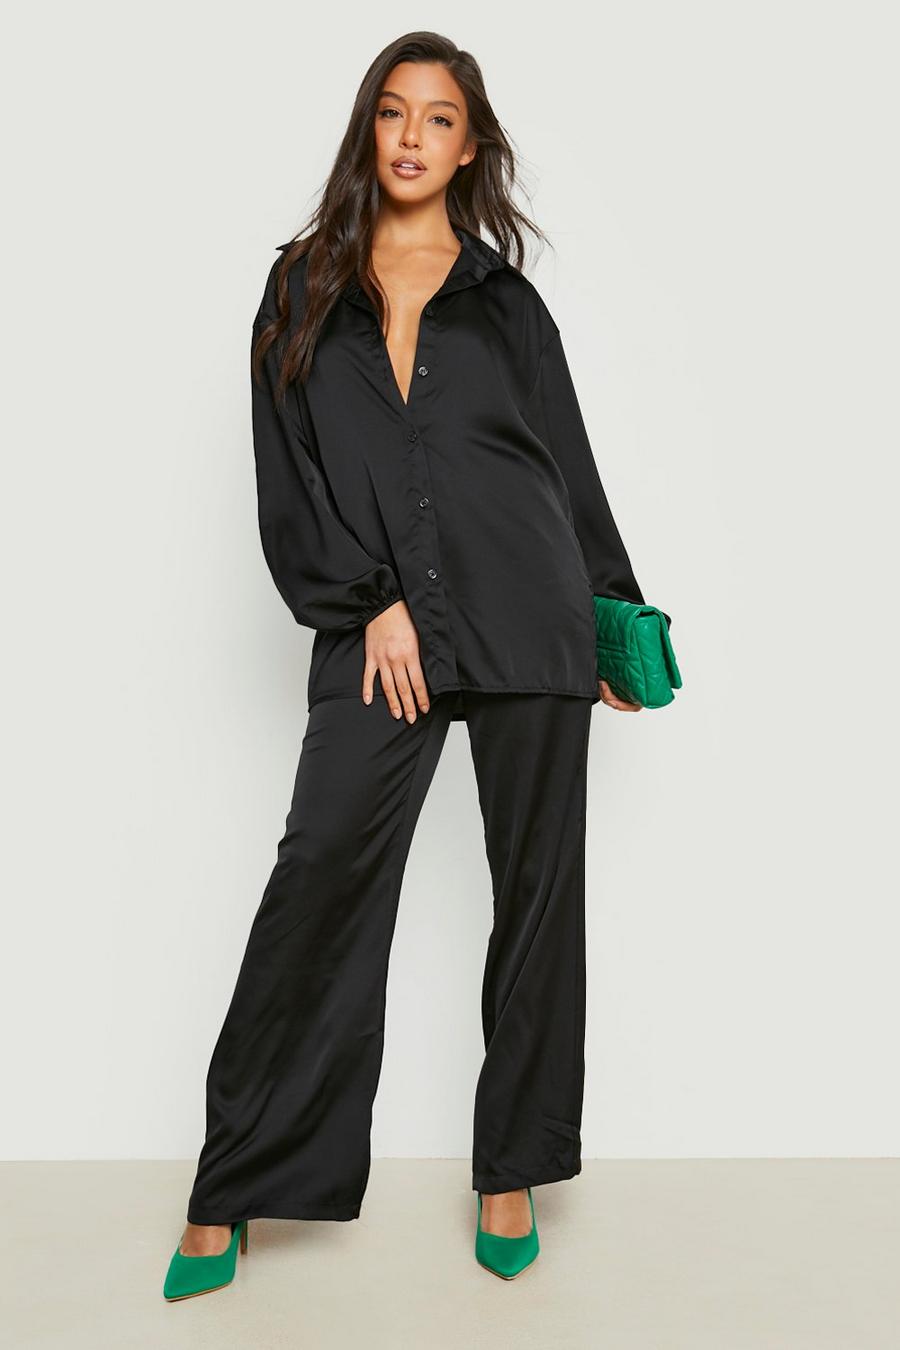 Black Satin Relaxed Fit Shirt & Wide Leg Pants image number 1